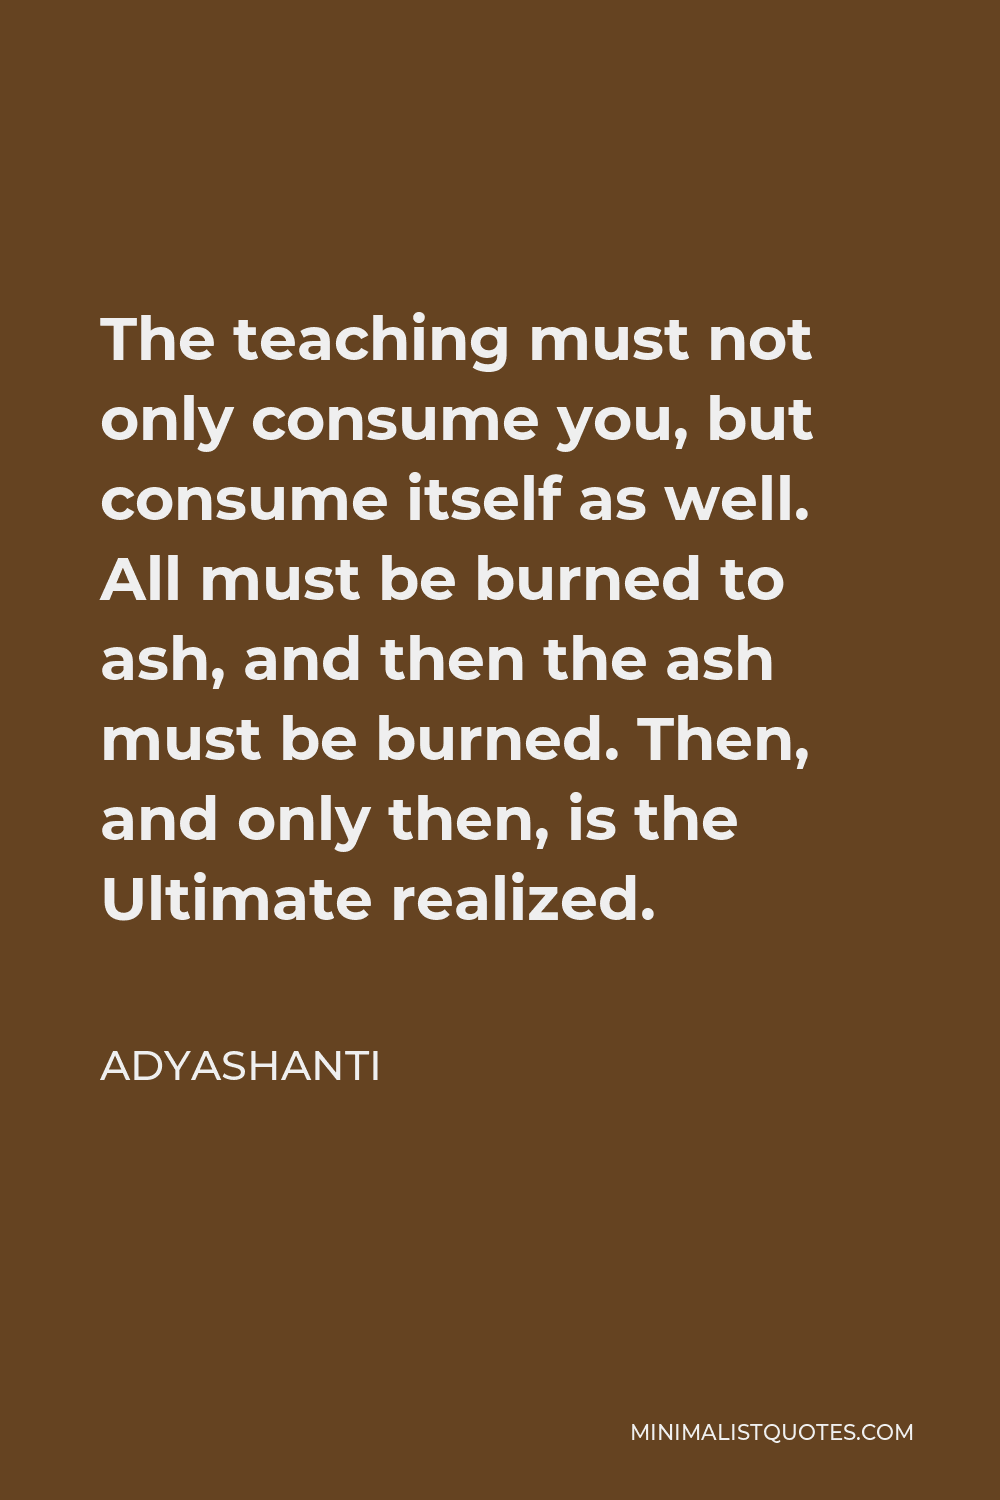 Adyashanti Quote - The teaching must not only consume you, but consume itself as well. All must be burned to ash, and then the ash must be burned. Then, and only then, is the Ultimate realized.